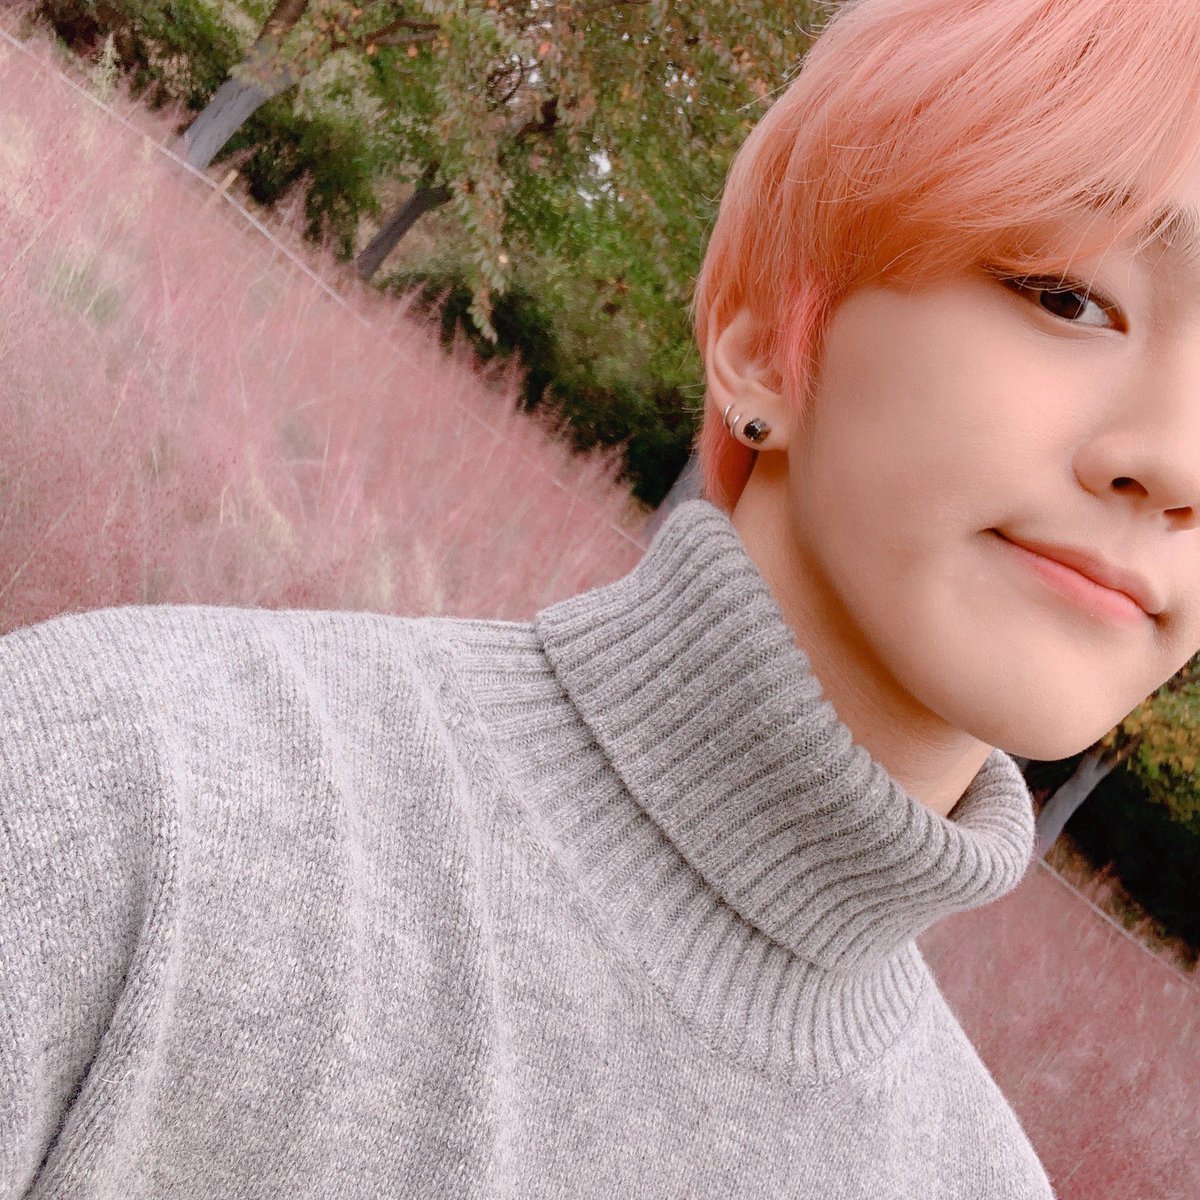 day 40, february 9thhong joochan➪ golden child - main vocalist➪ non-biasTHE AESTHETIC OF THIS SELFIE IS SO CUTE <333